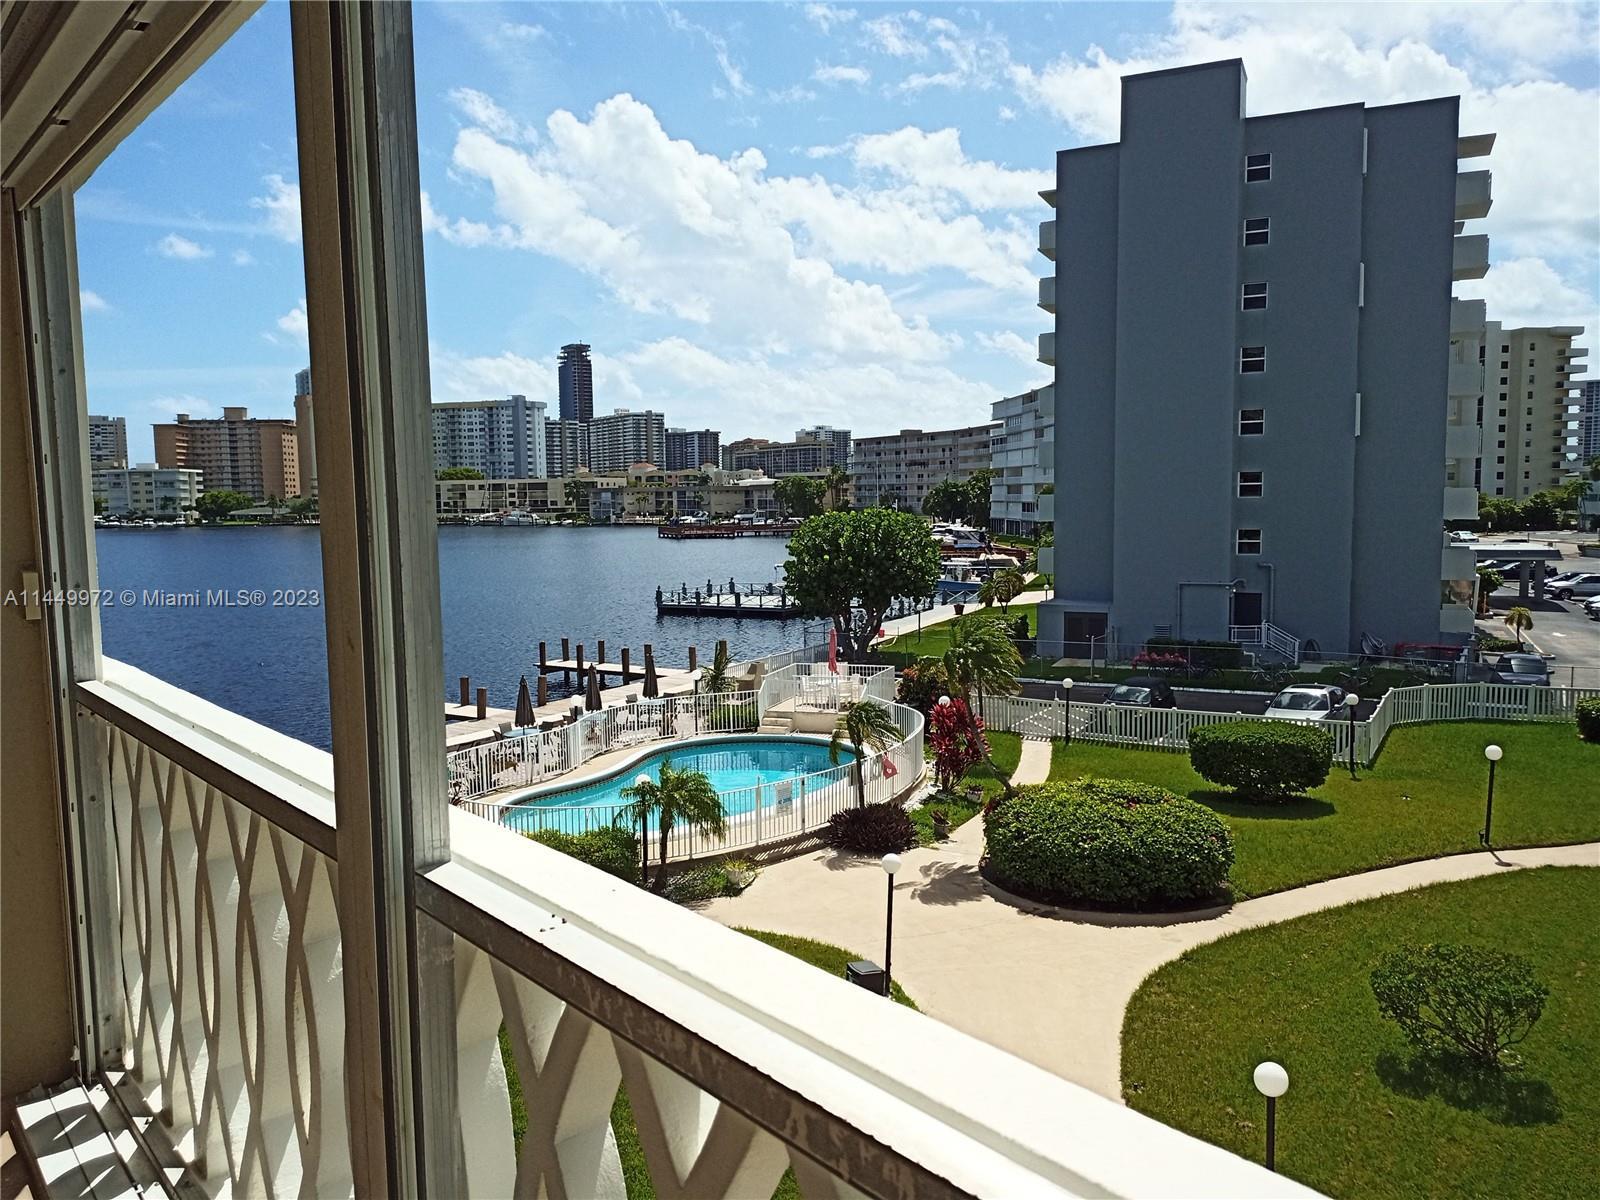 Cozy 1Bd/1Bath unit in smaller Condo Property - 26 units. Unit has great Water view. 4 blocks to the